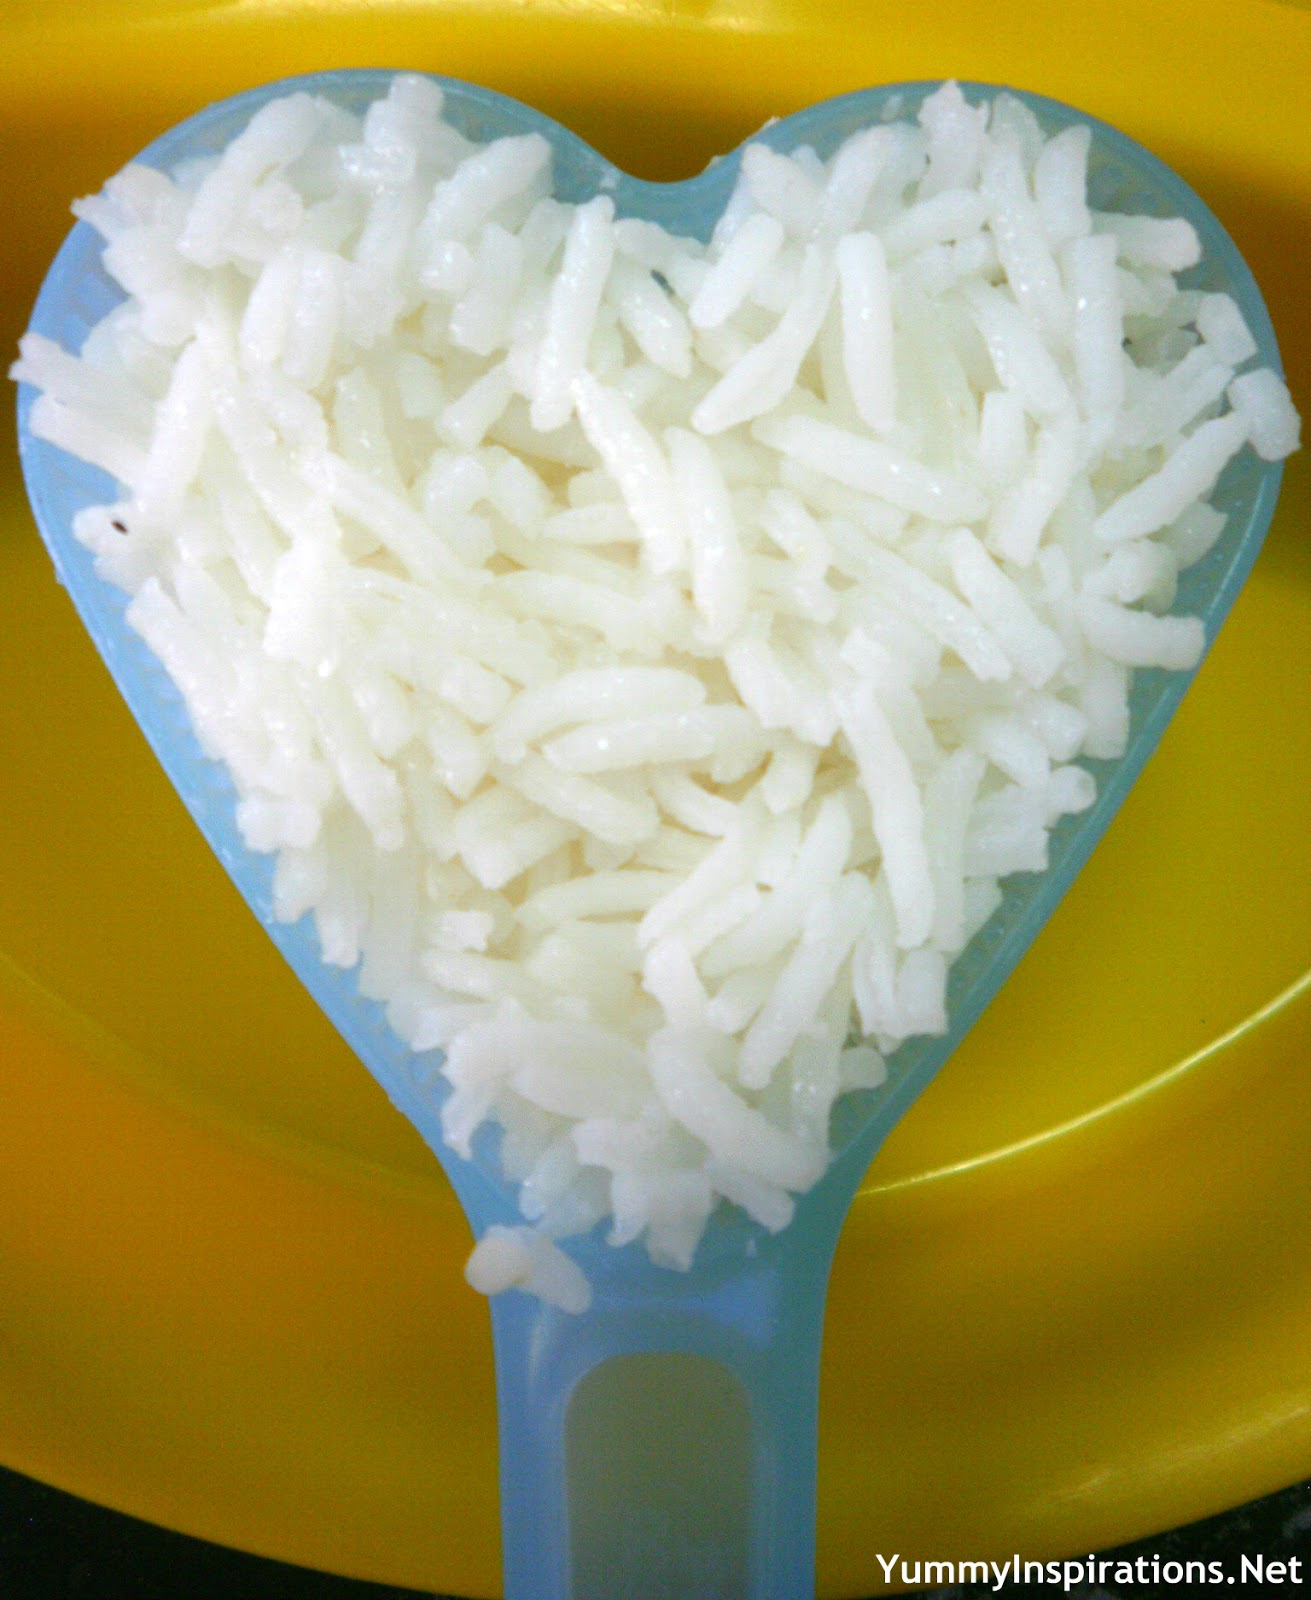 Top 101+ Images what does mold on uncooked rice look like Excellent